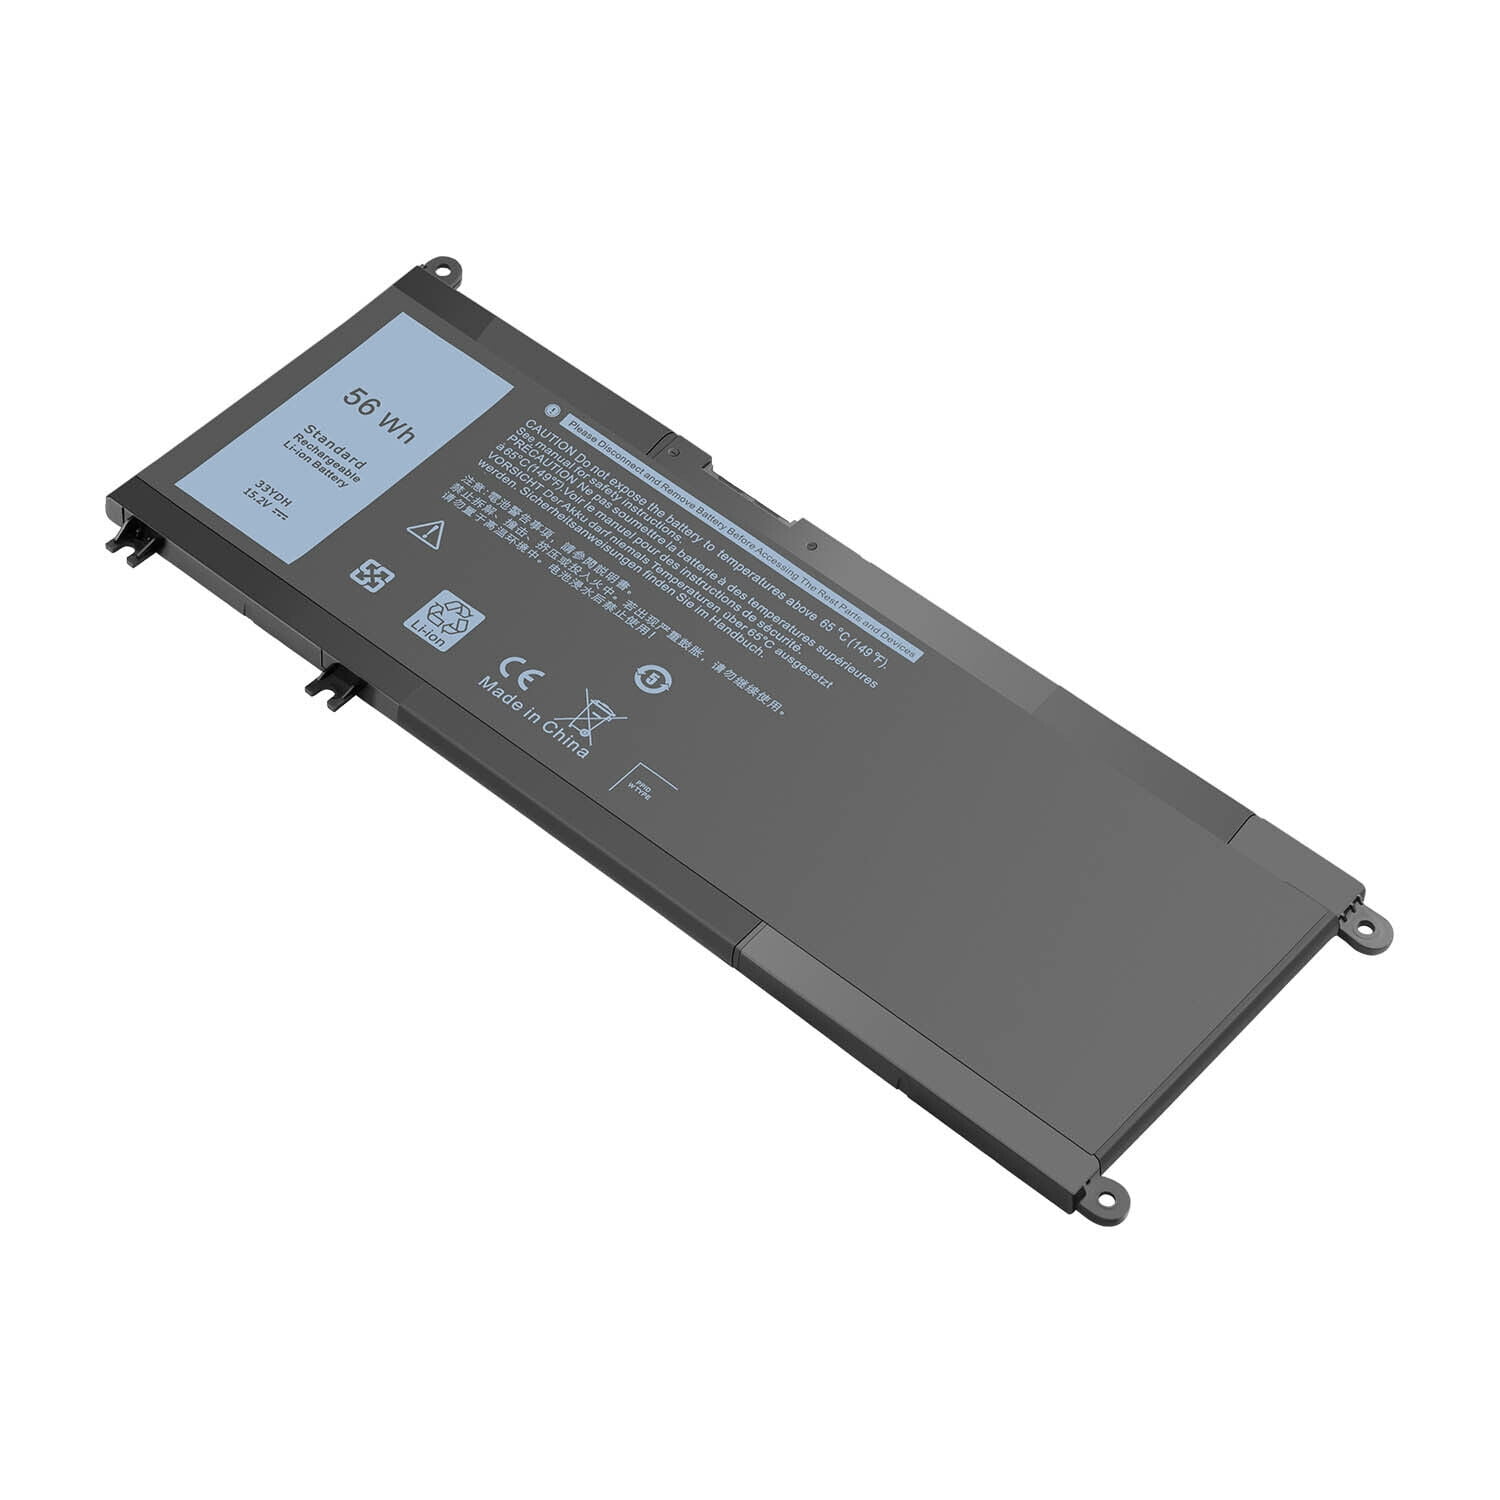 NEW 56WH 33YDH Laptop Battery for Dell Inspiron 17 7000 2in1 7778 7779 7786  7773 